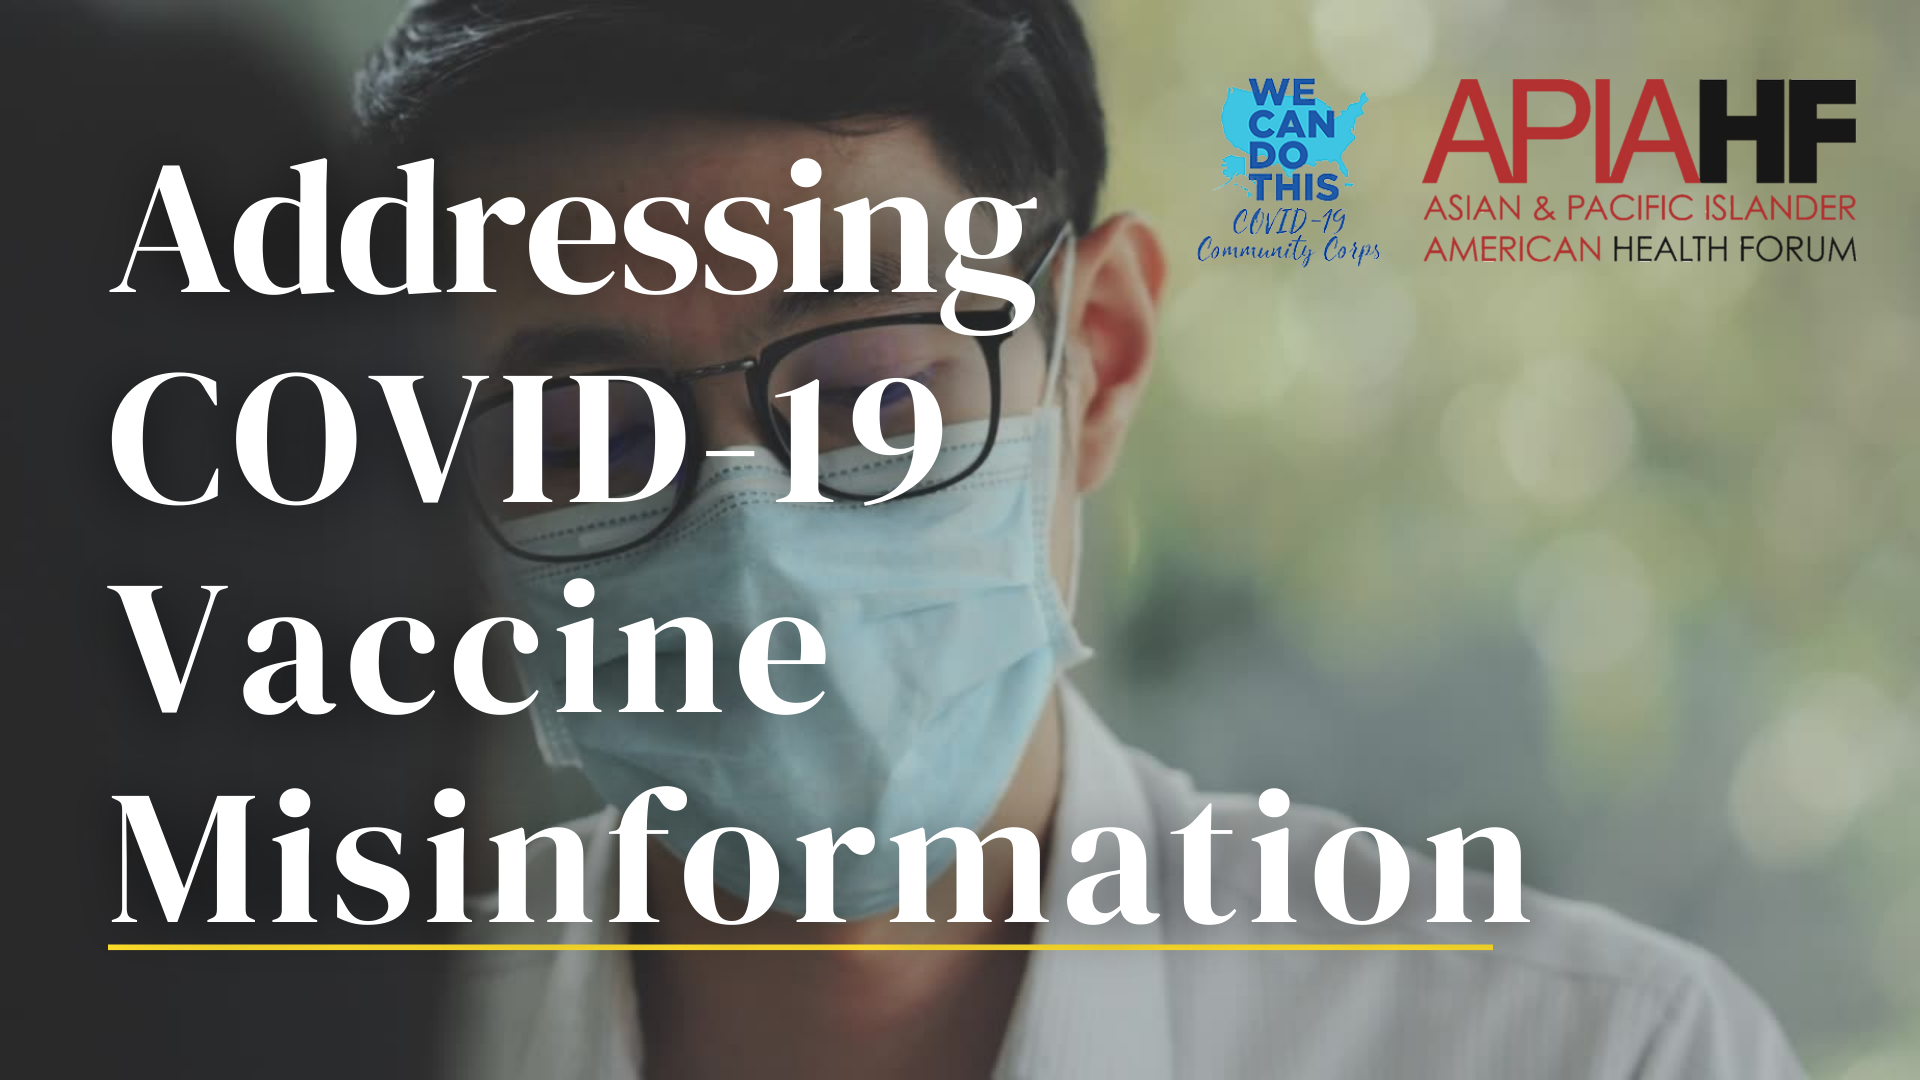 Image of Asian physician wearing a mask and a lab coat and looking down. The logo for the organization is in the top right corner.  In white large letters a title reads "Addressing COVID-19 Vaccine Misinformation."